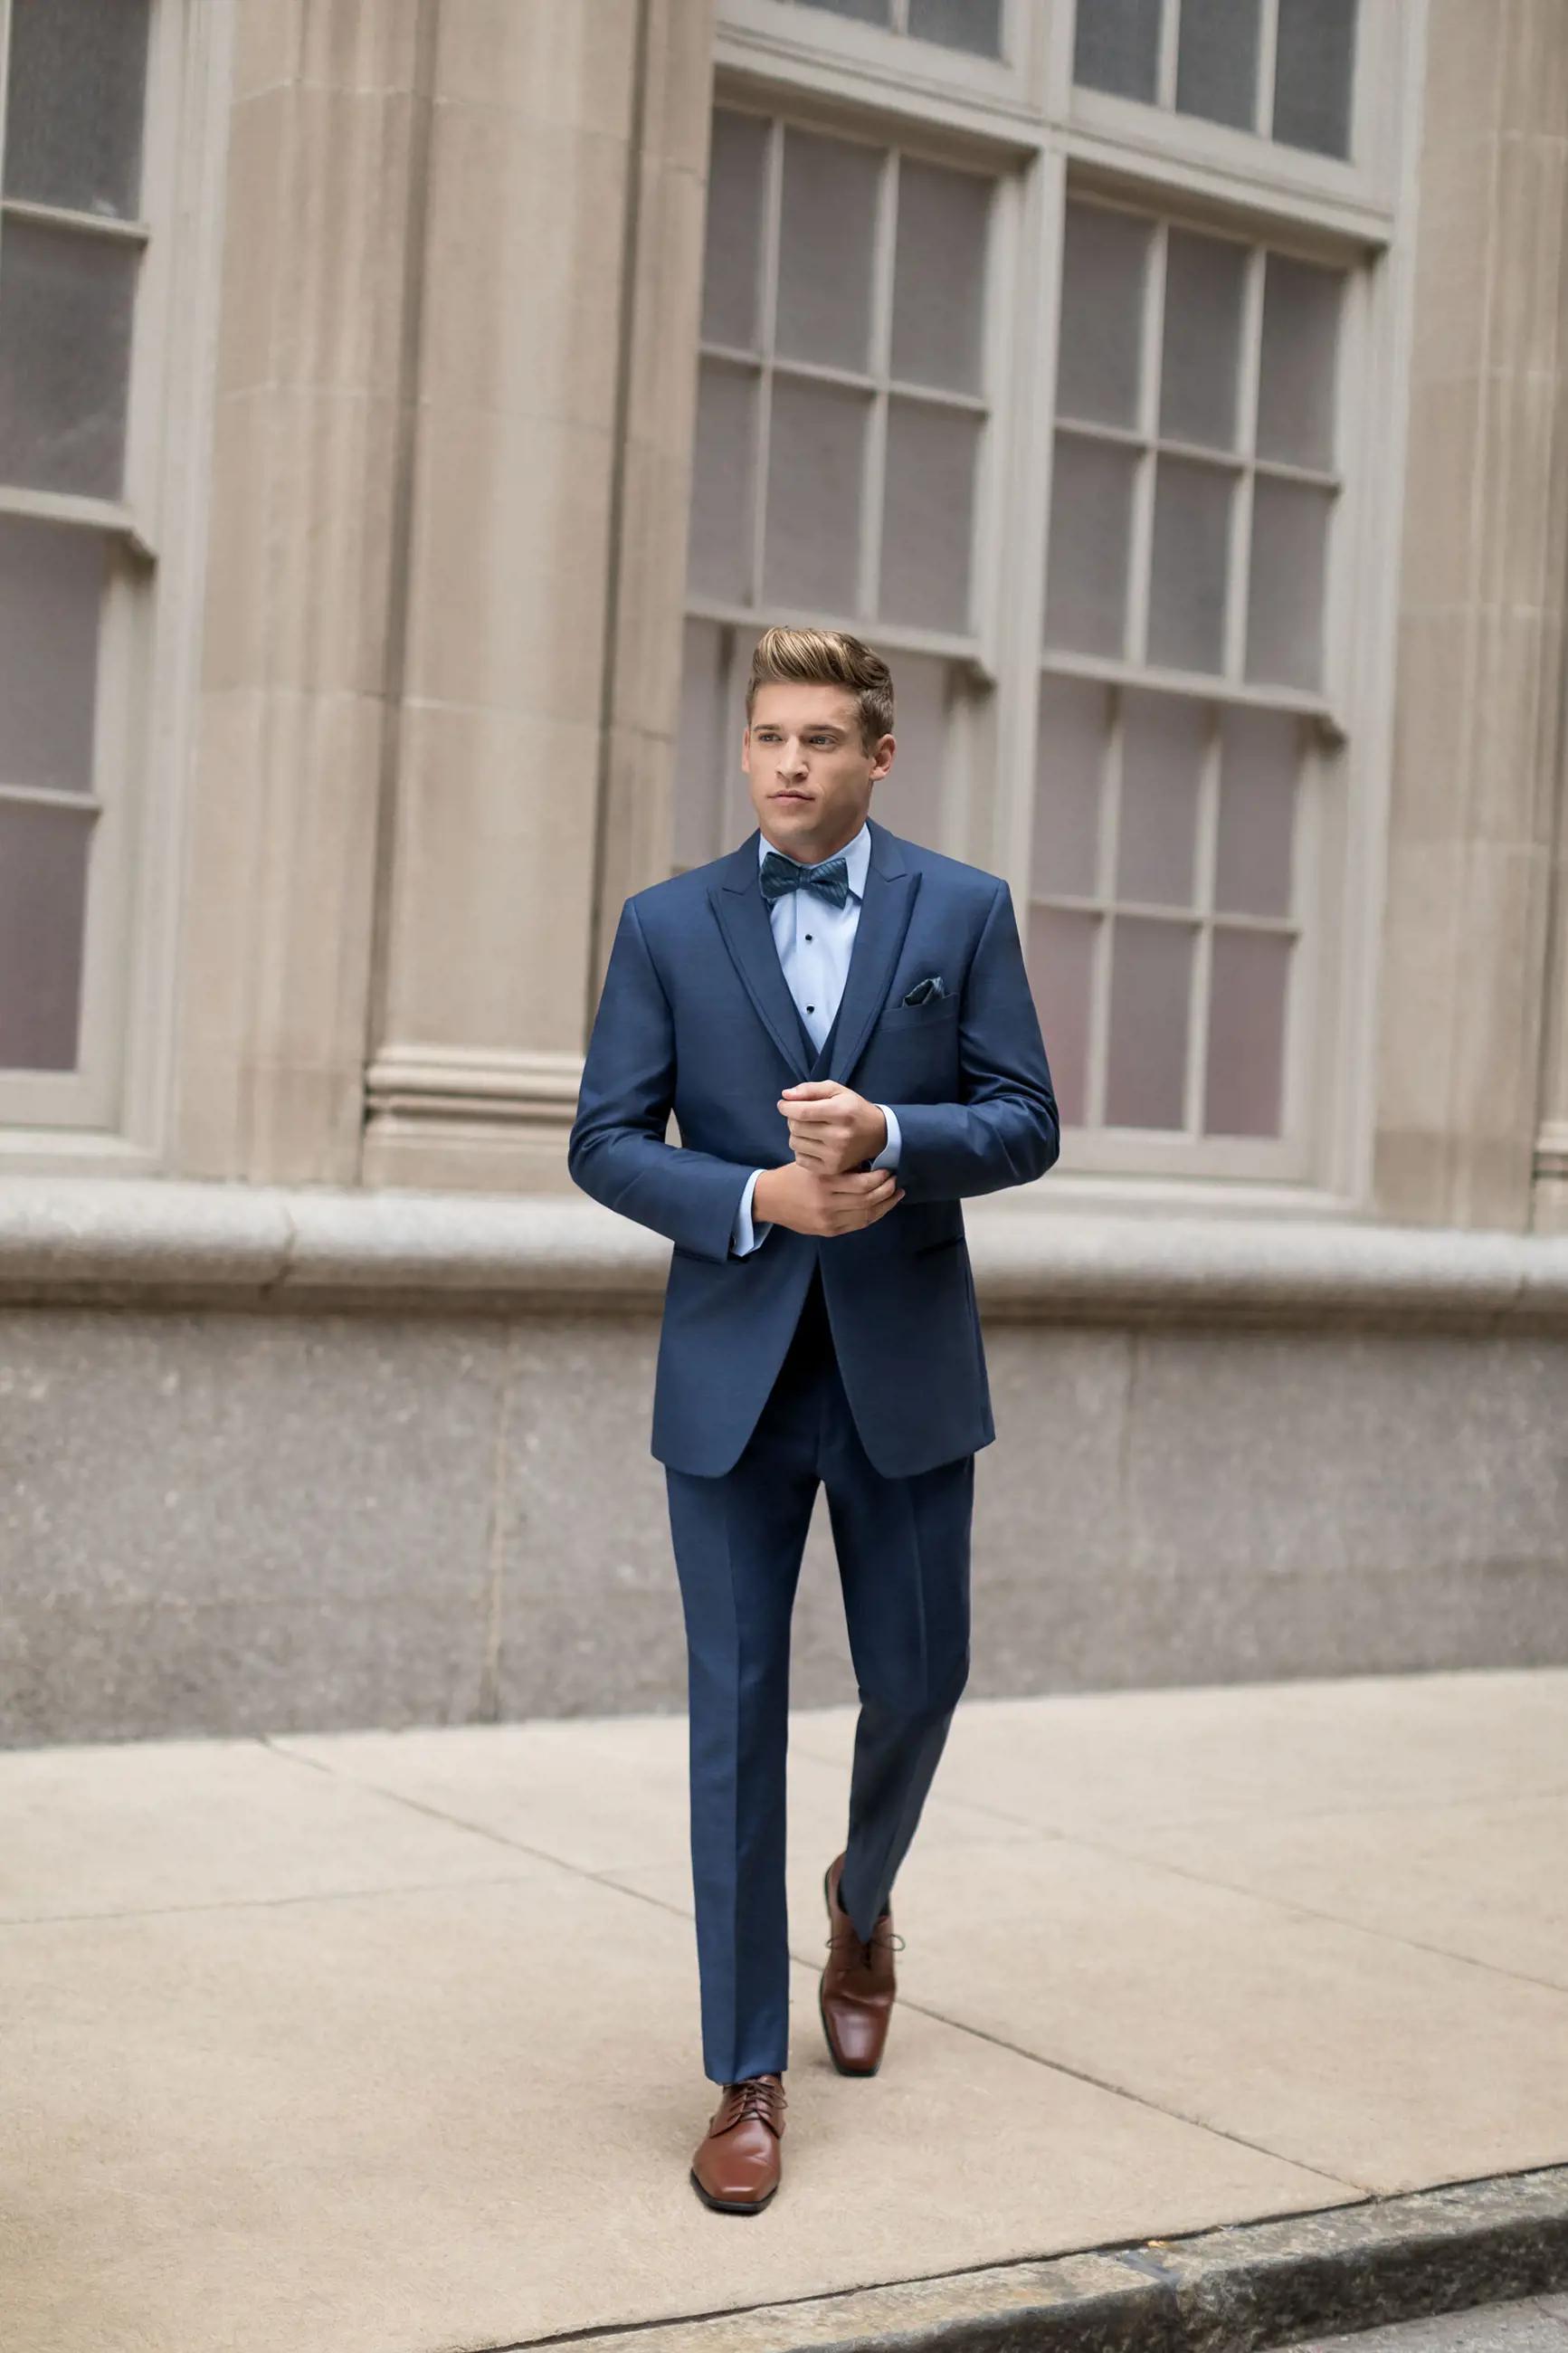 Model wearing a dark-blue suit at the street